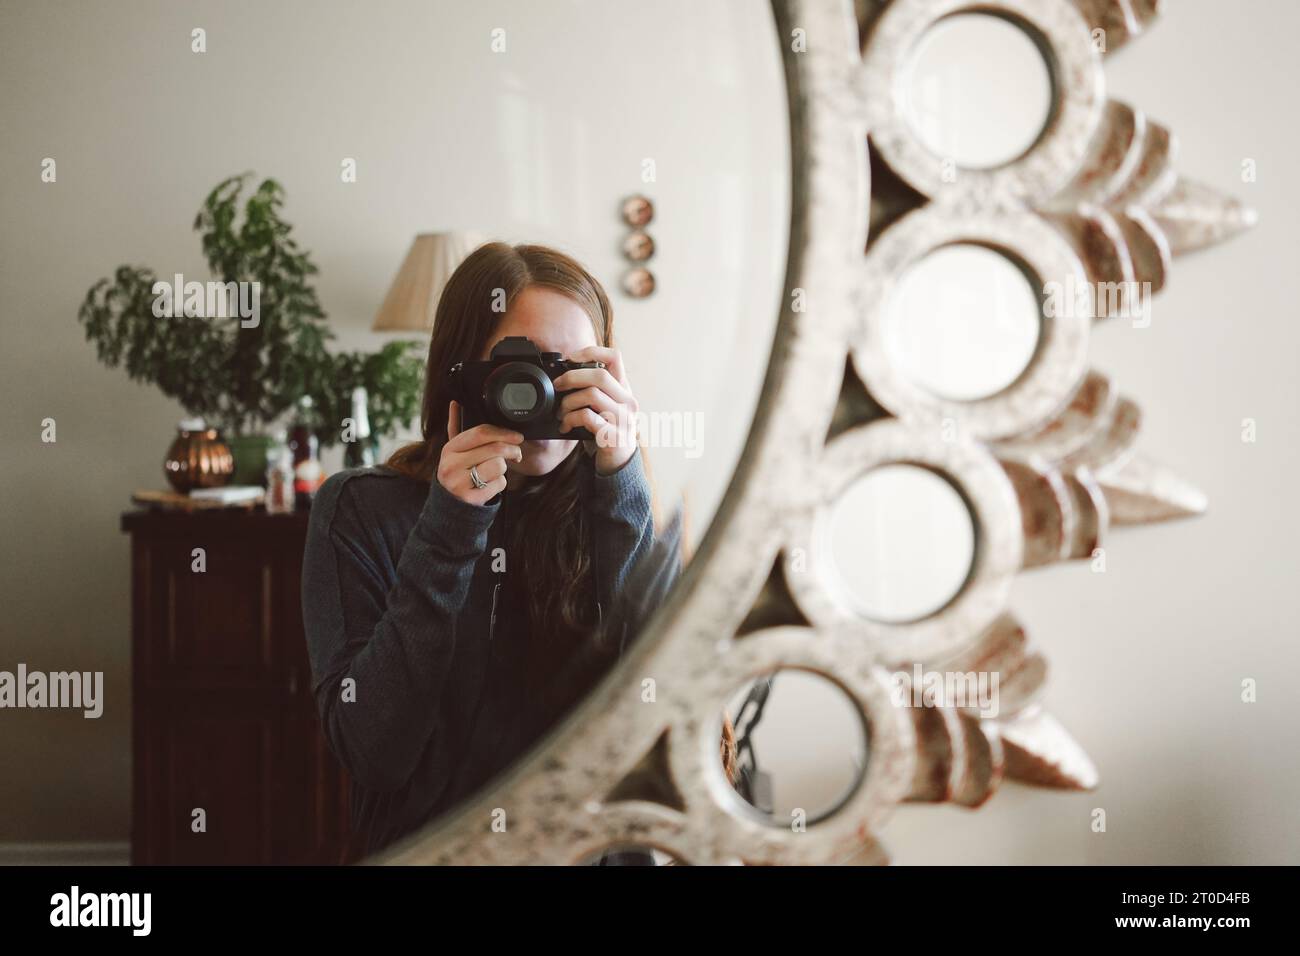 Woman captures a selfie in a mirror with DSLR camera Stock Photo